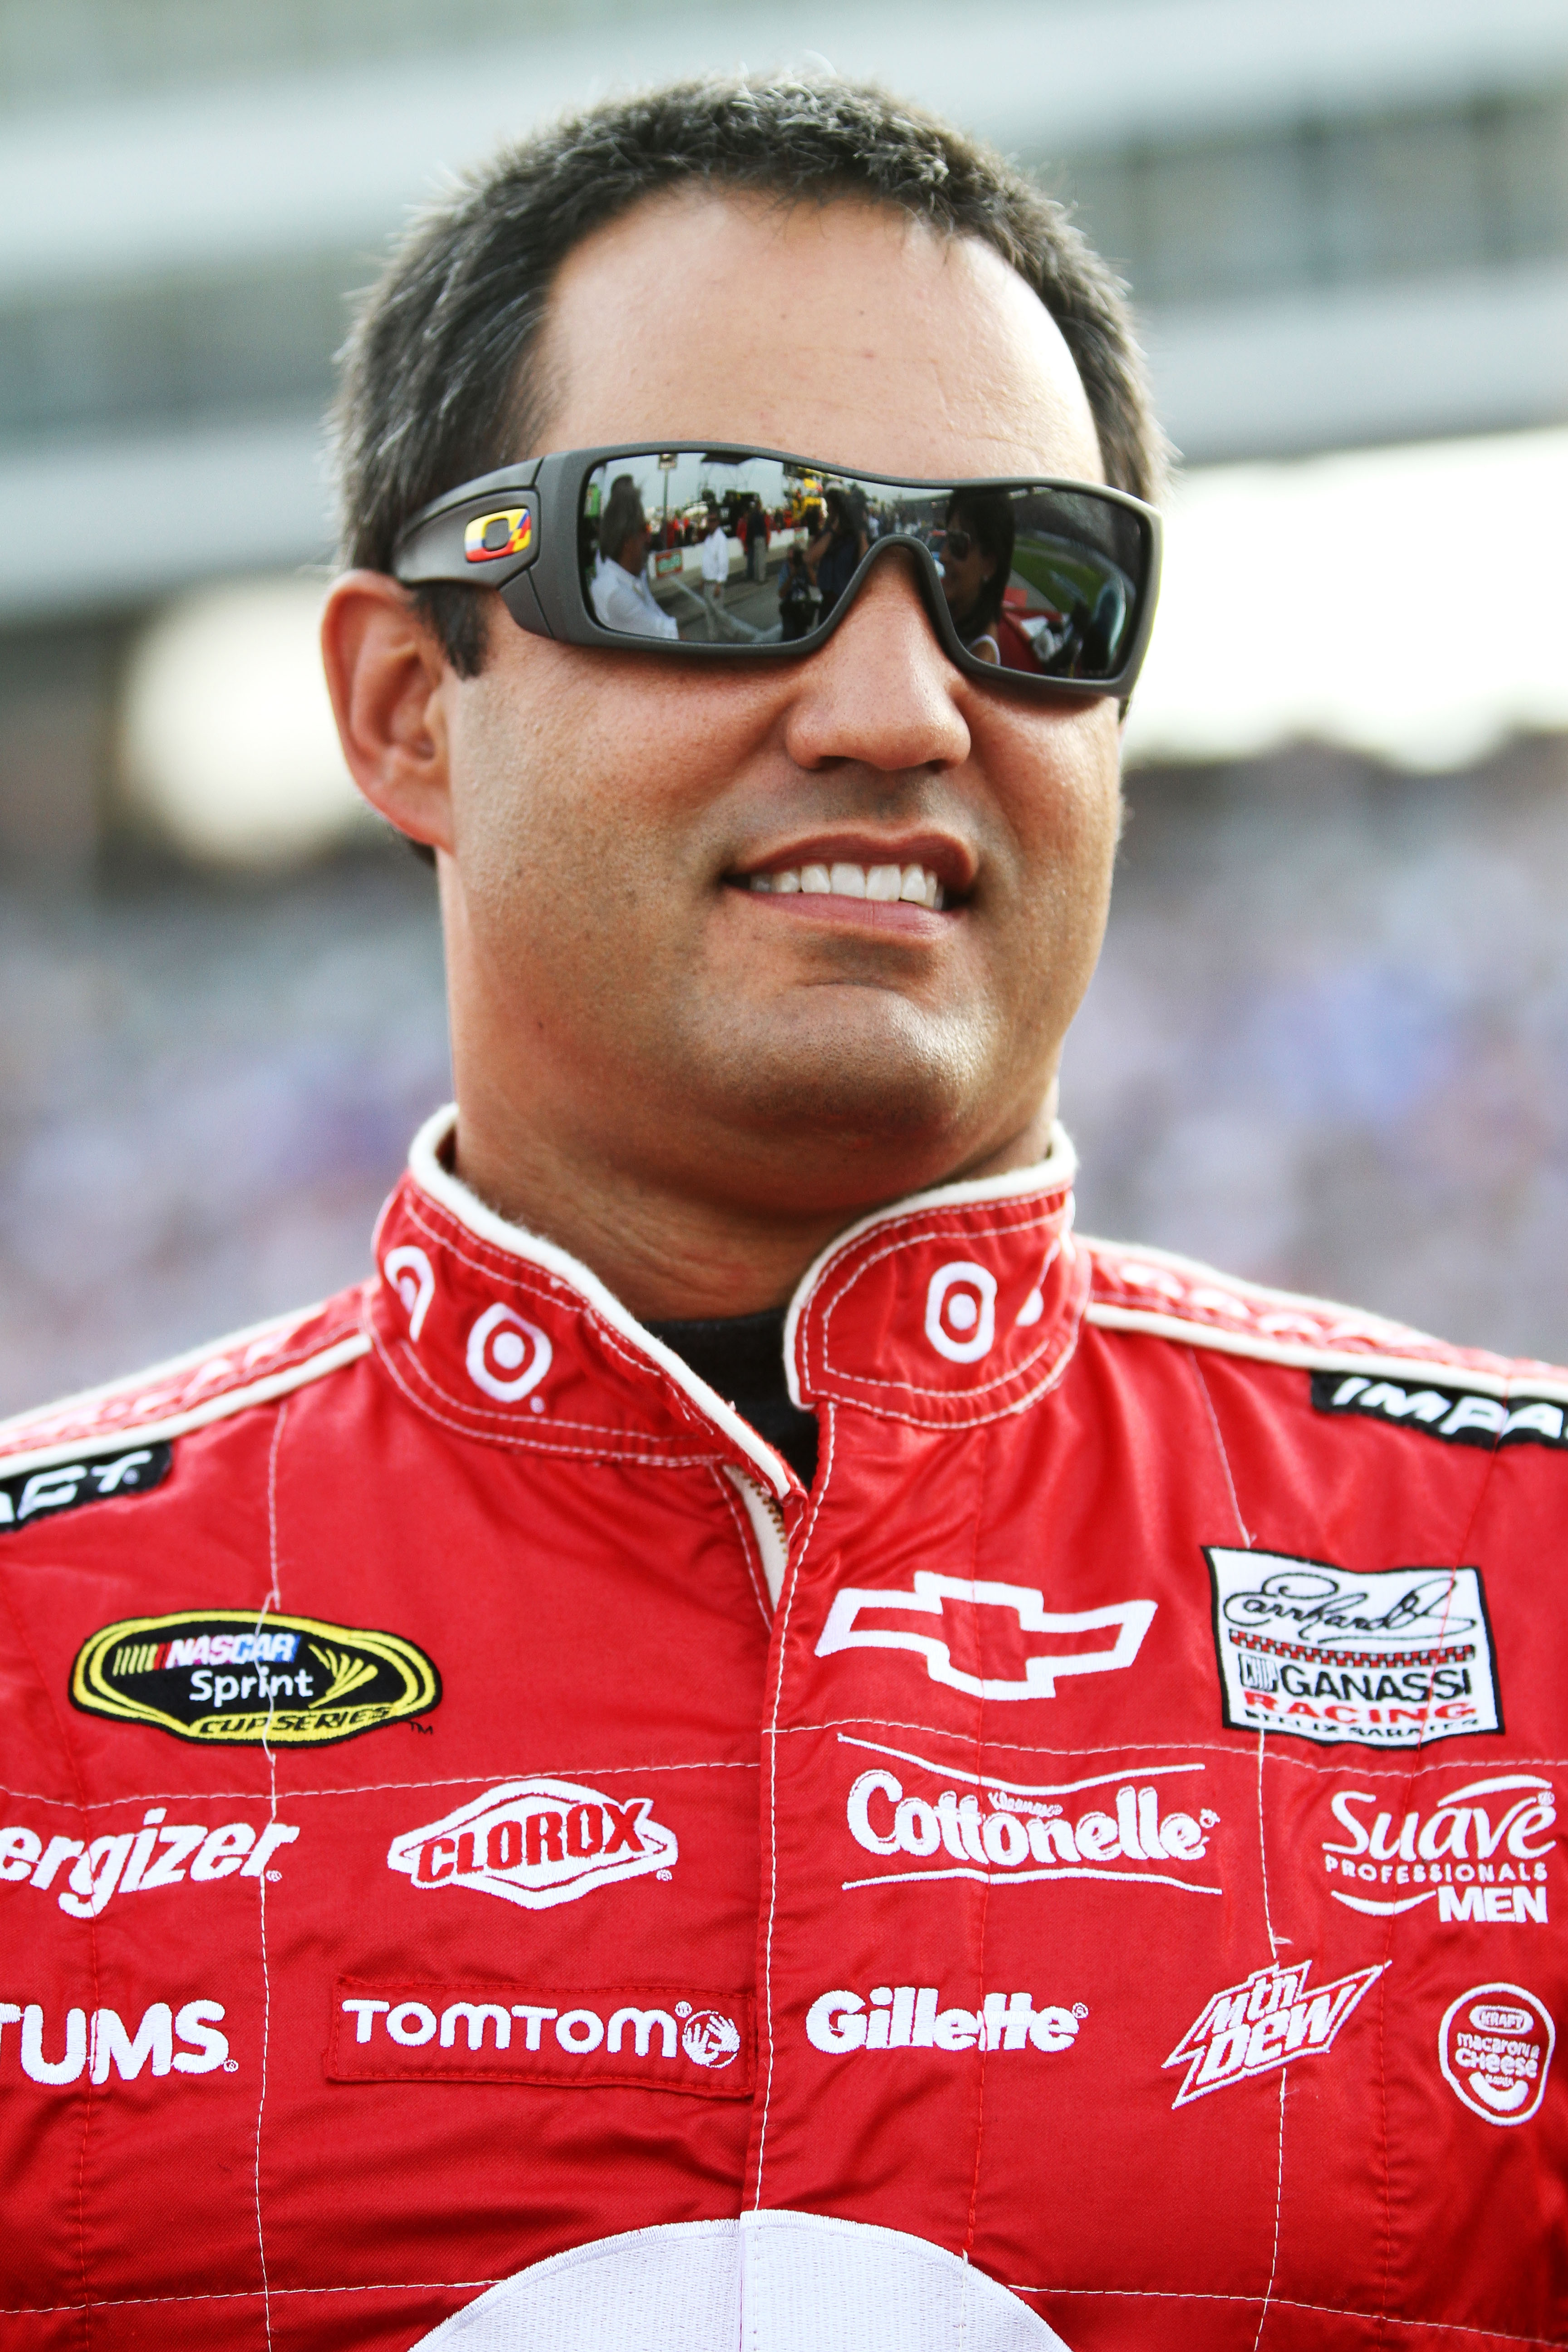 FORT WORTH, TX - APRIL 09:  Juan Pablo Montoya, driver of the #42 Target Chevrolet, stands on the grid prior to the start of the NASCAR Sprint Cup Series Samsung Mobile 500 at Texas Motor Speedway on April 9, 2011 in Fort Worth, Texas.  (Photo by Jerry Ma